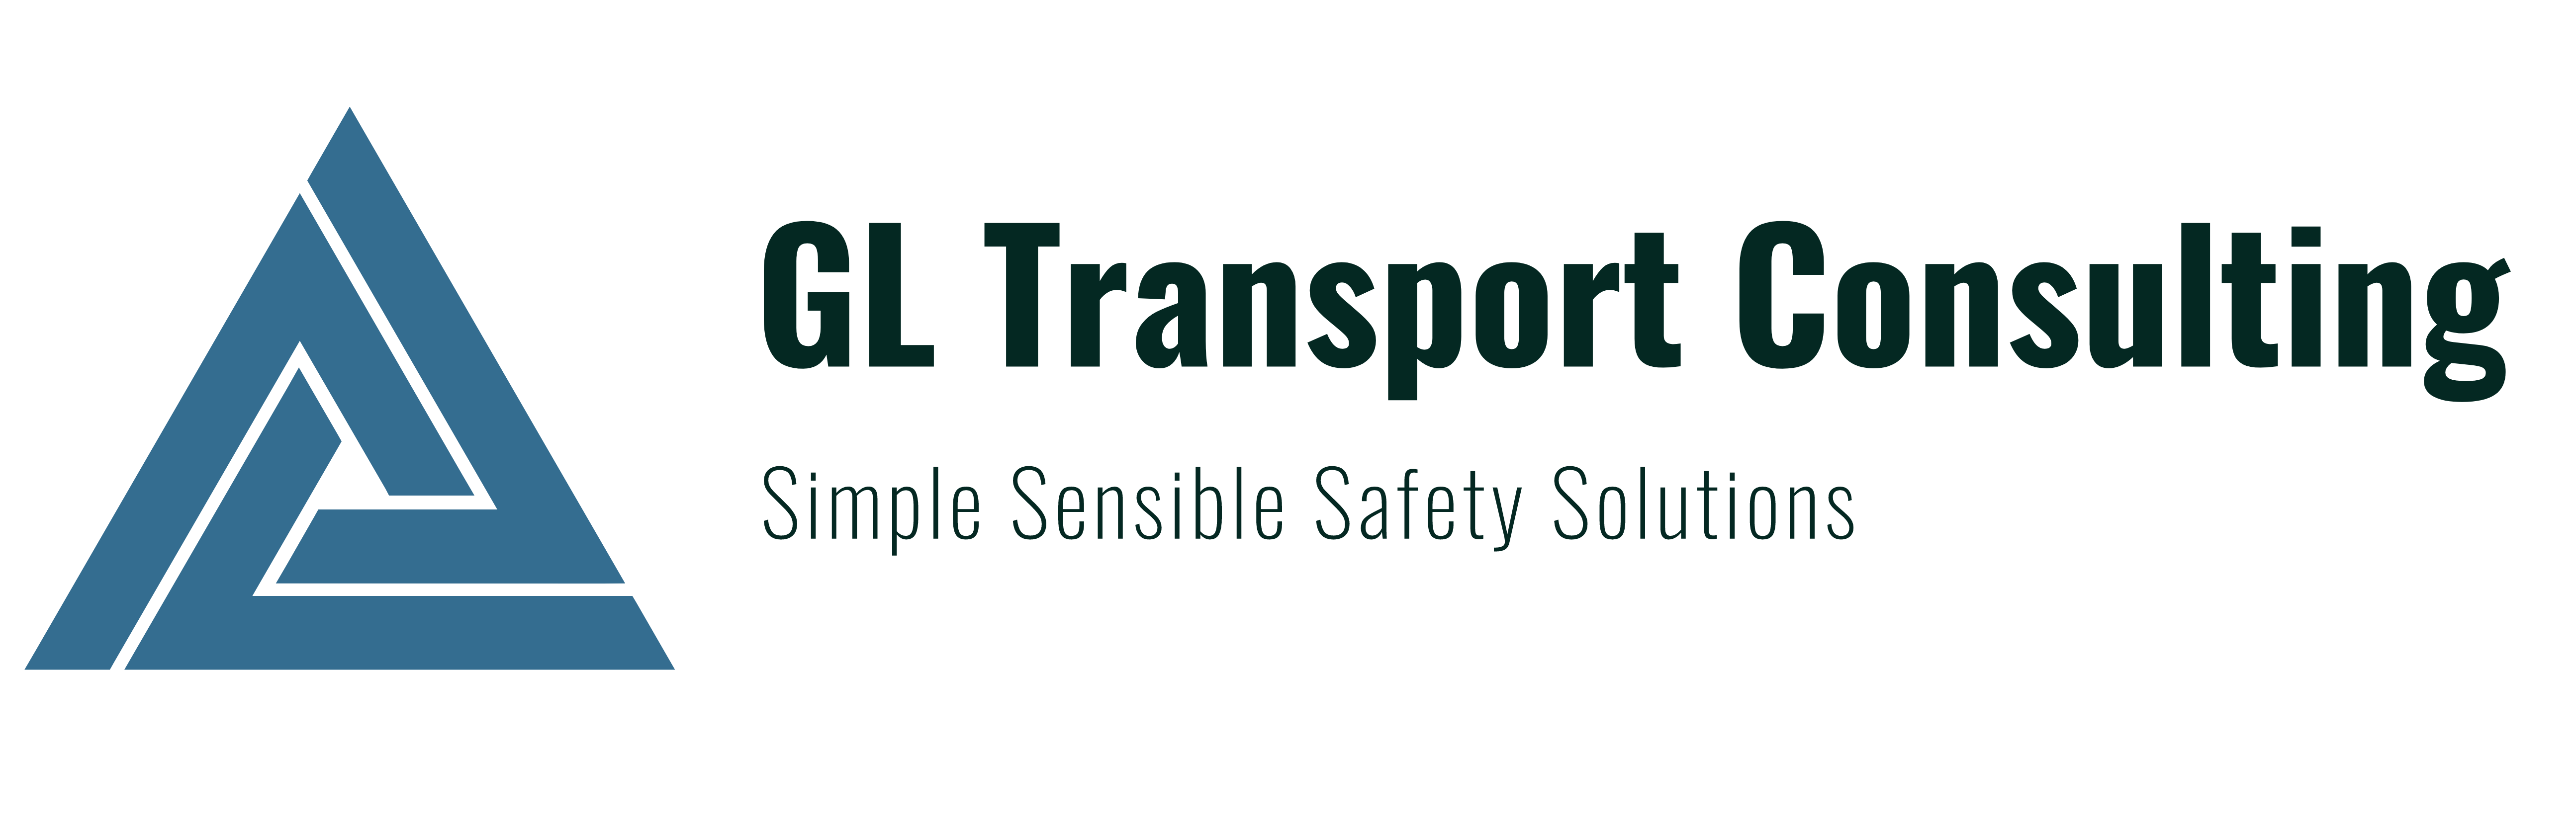 GL Transport Consulting logo